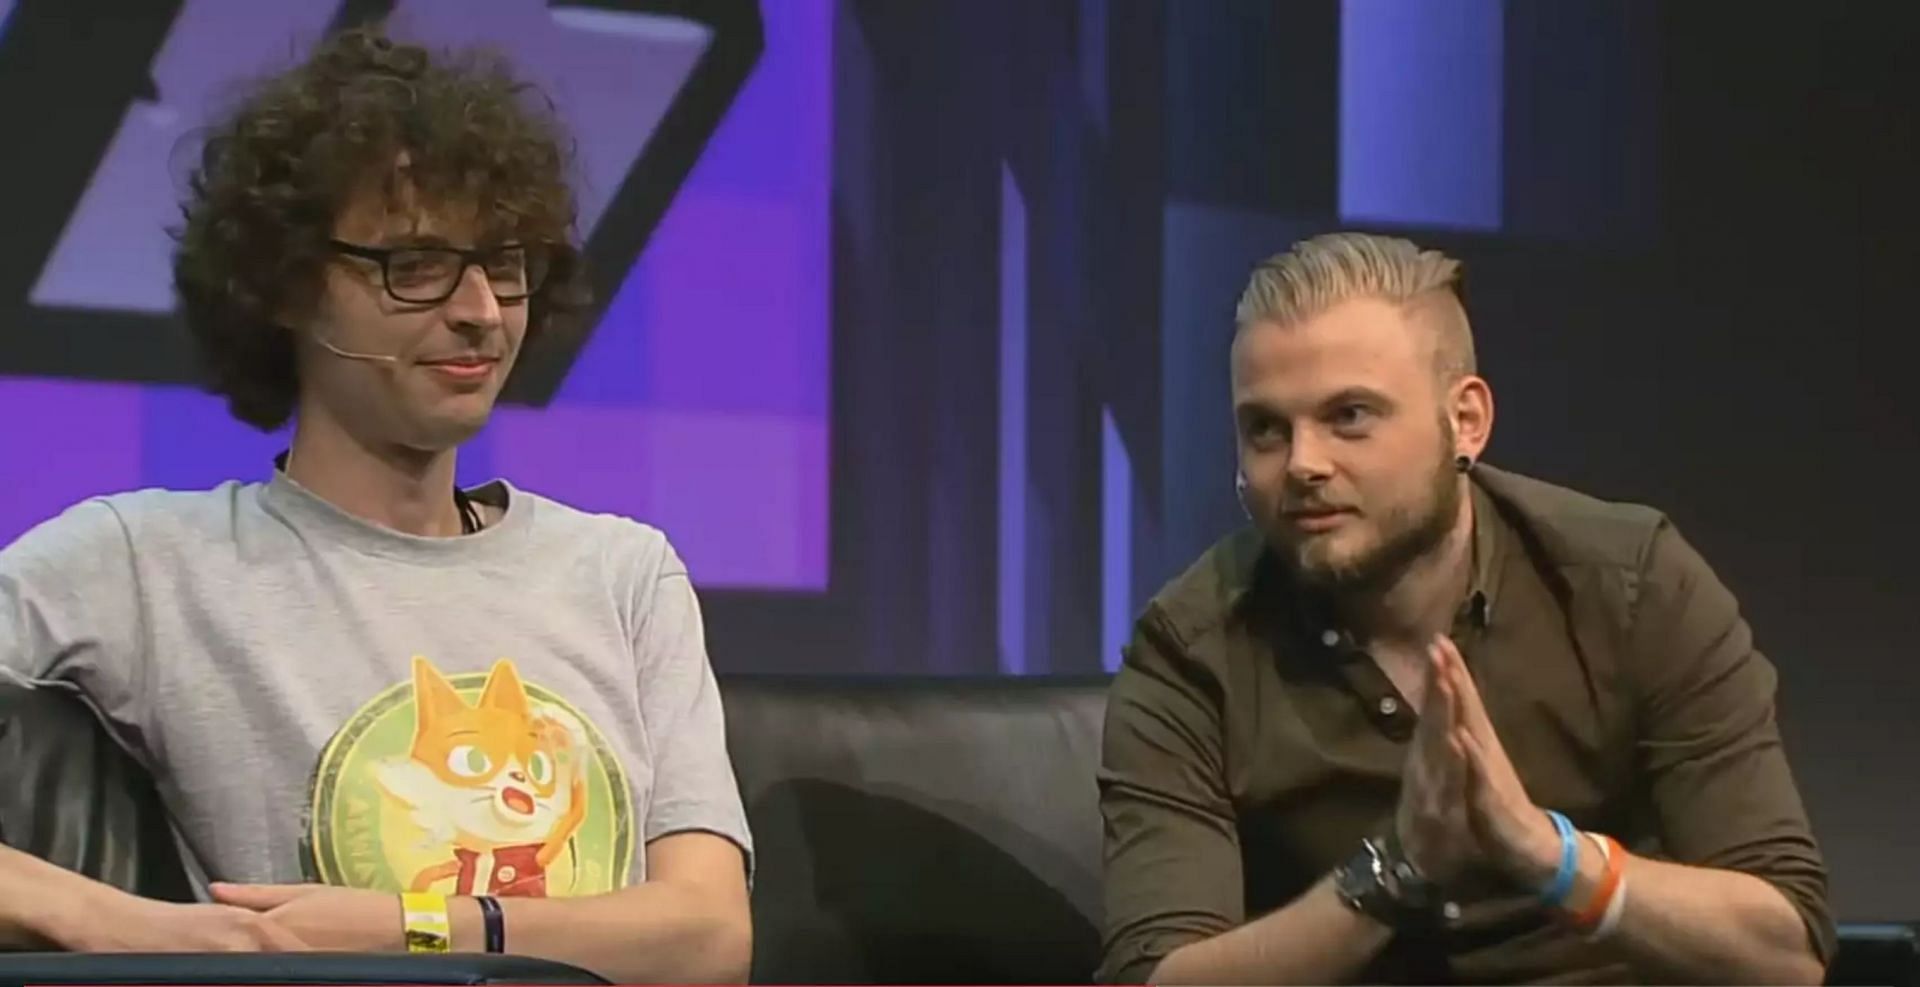 Stampy (left) and iBallisticSquid (right) speaking at a Minecon event (Image via Business Insider)